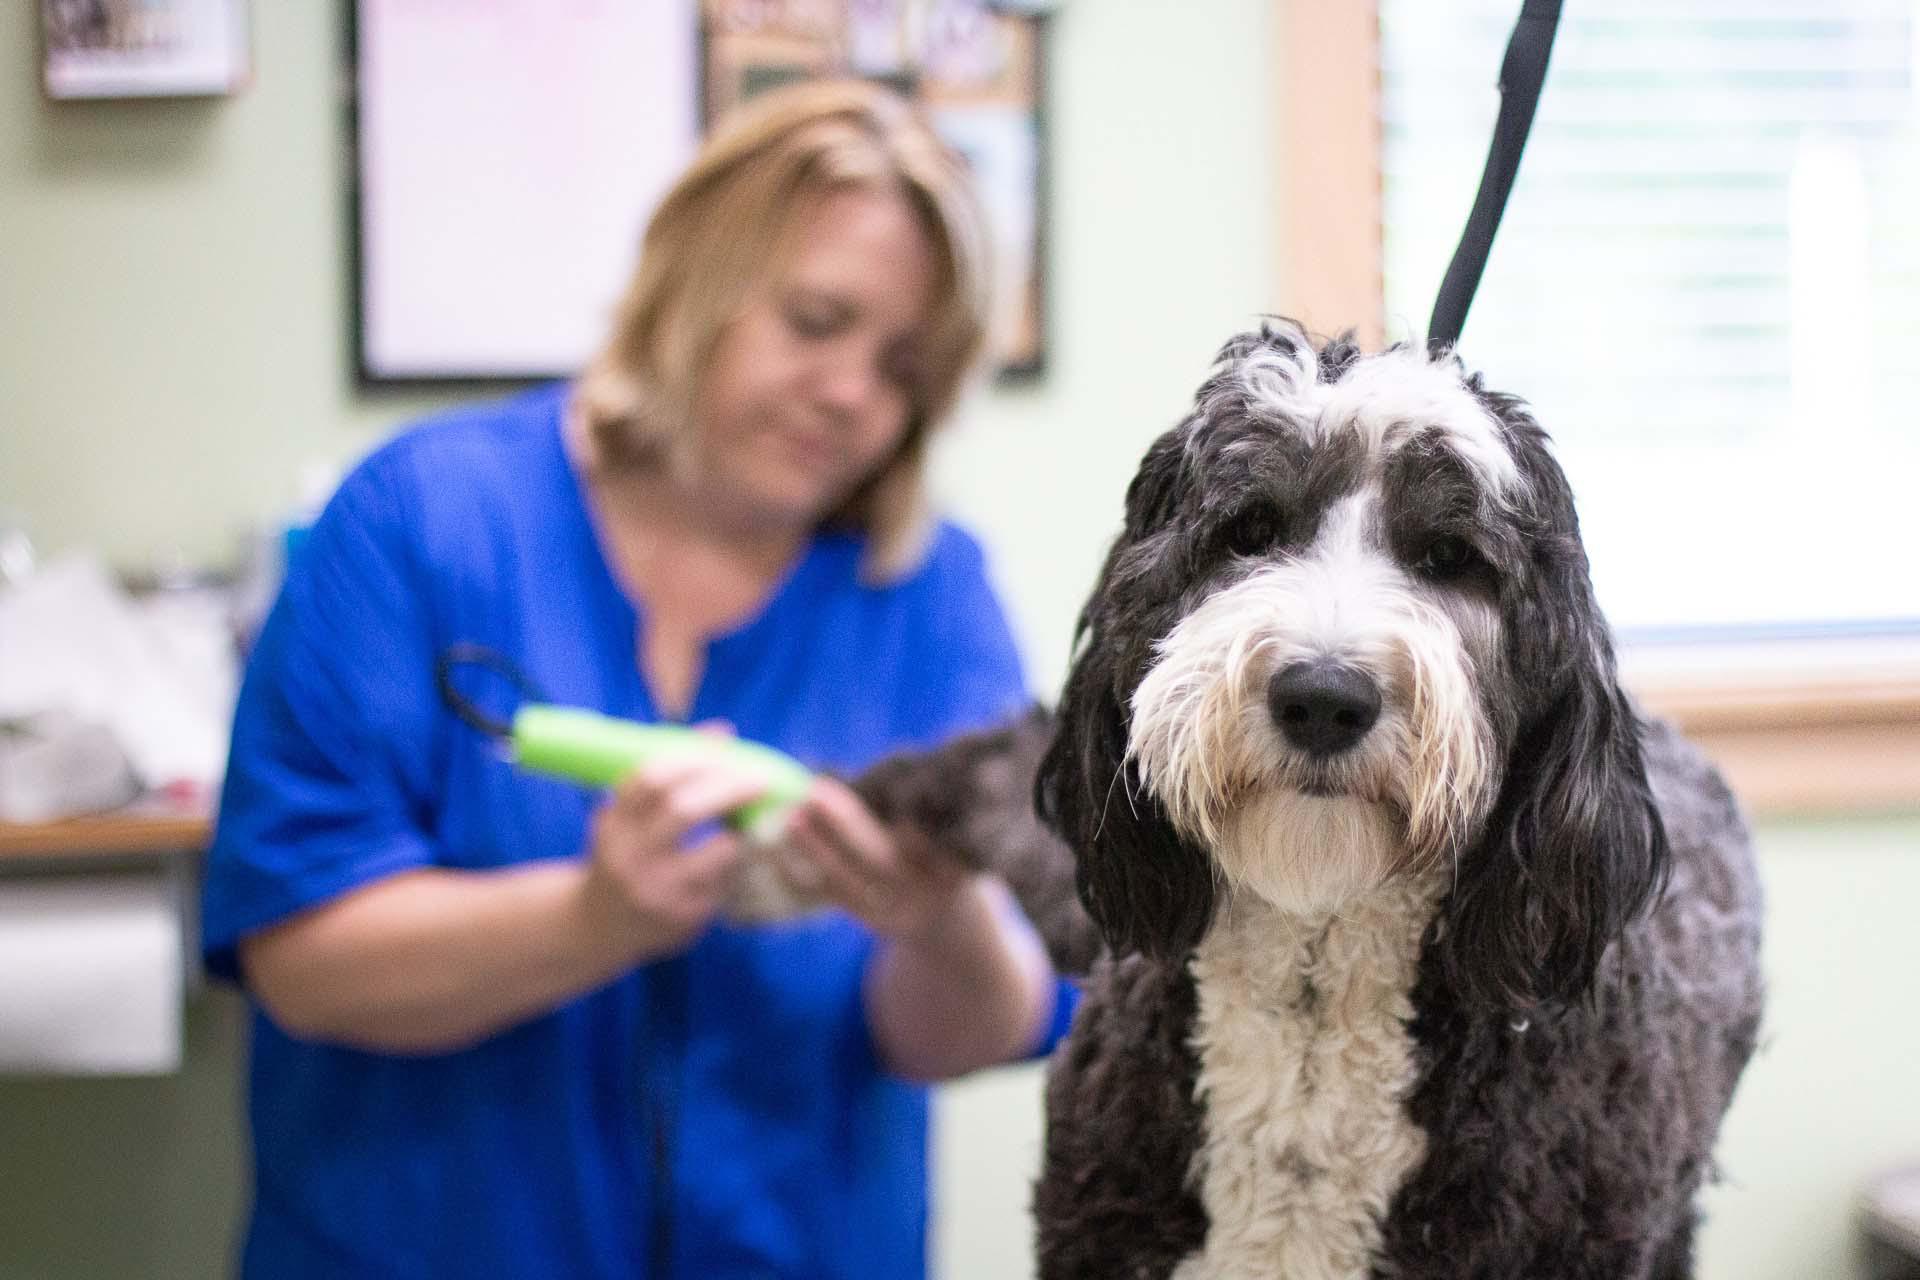 The grooming professionals at Lakeland Veterinary Hospital can help to keep your pet fresh, clean, and feeling their best. Regularly grooming your pet has many benefits, not only for hygienic reasons, but also for their health and comfort.